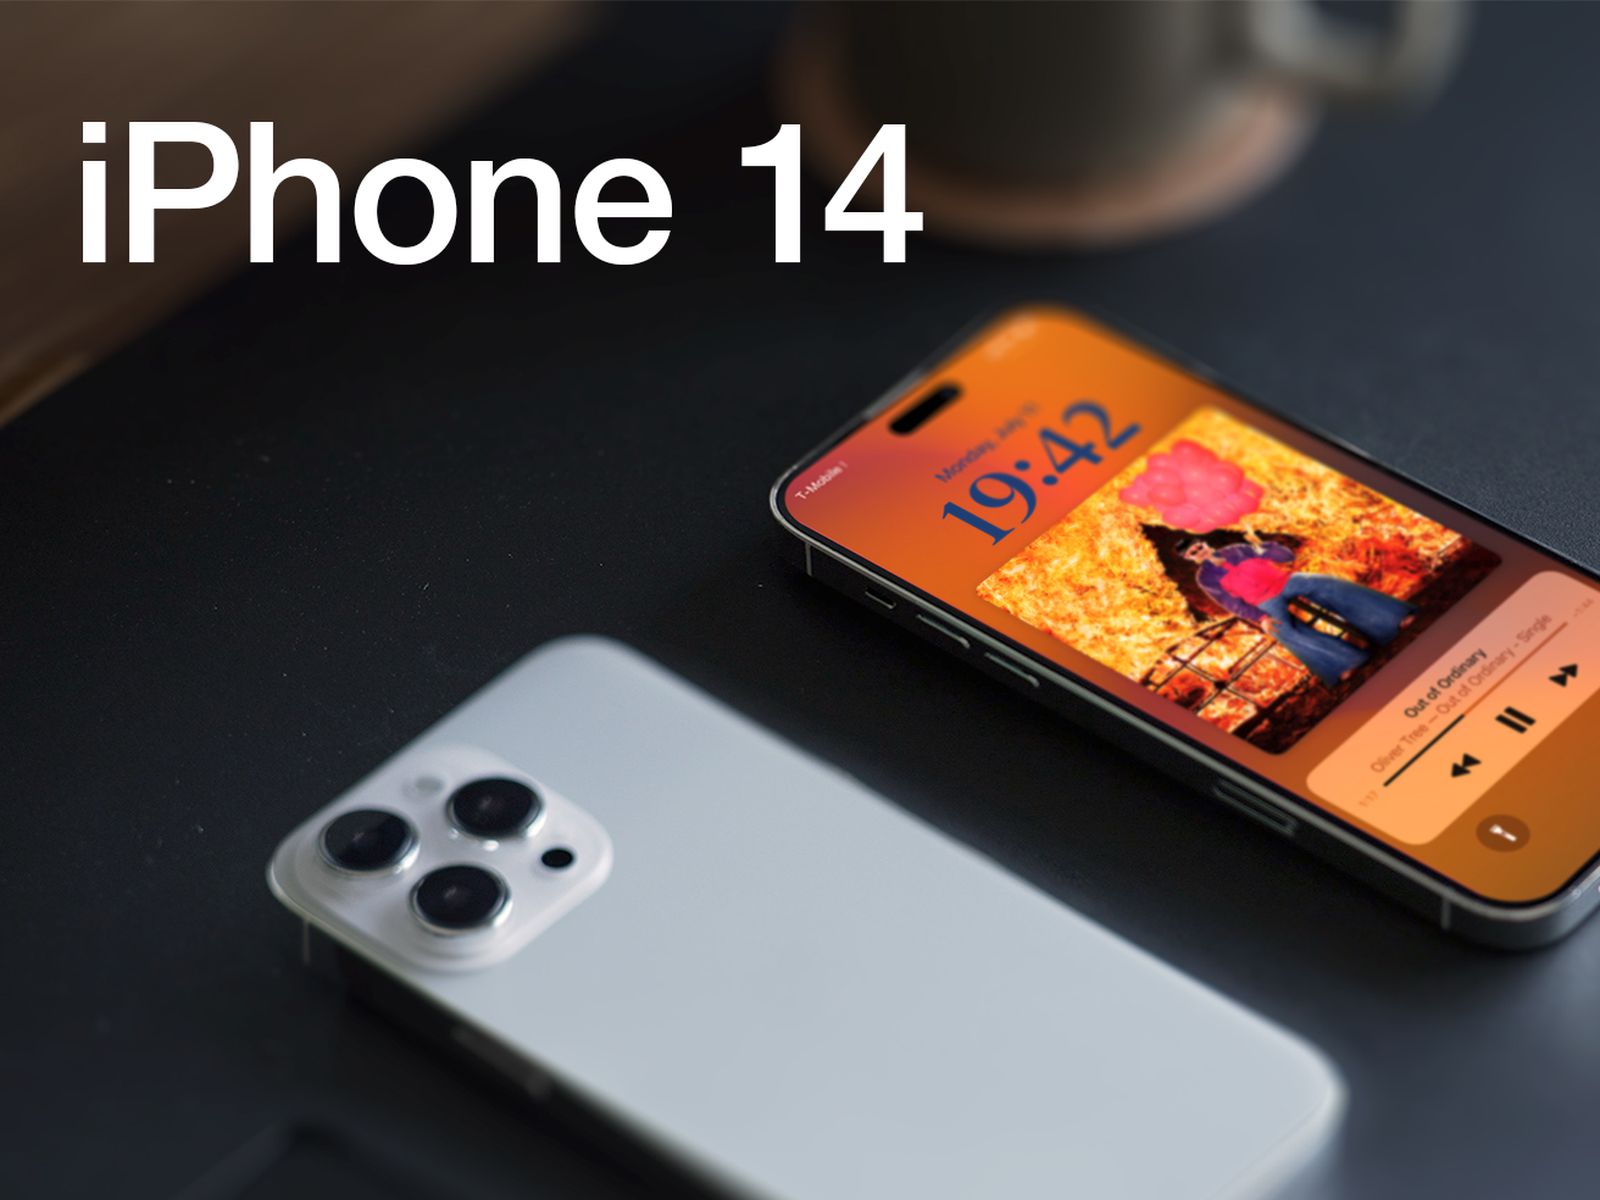 Review of Apple's iPhone 14 and iPhone 14 Pro: They're leaning into it